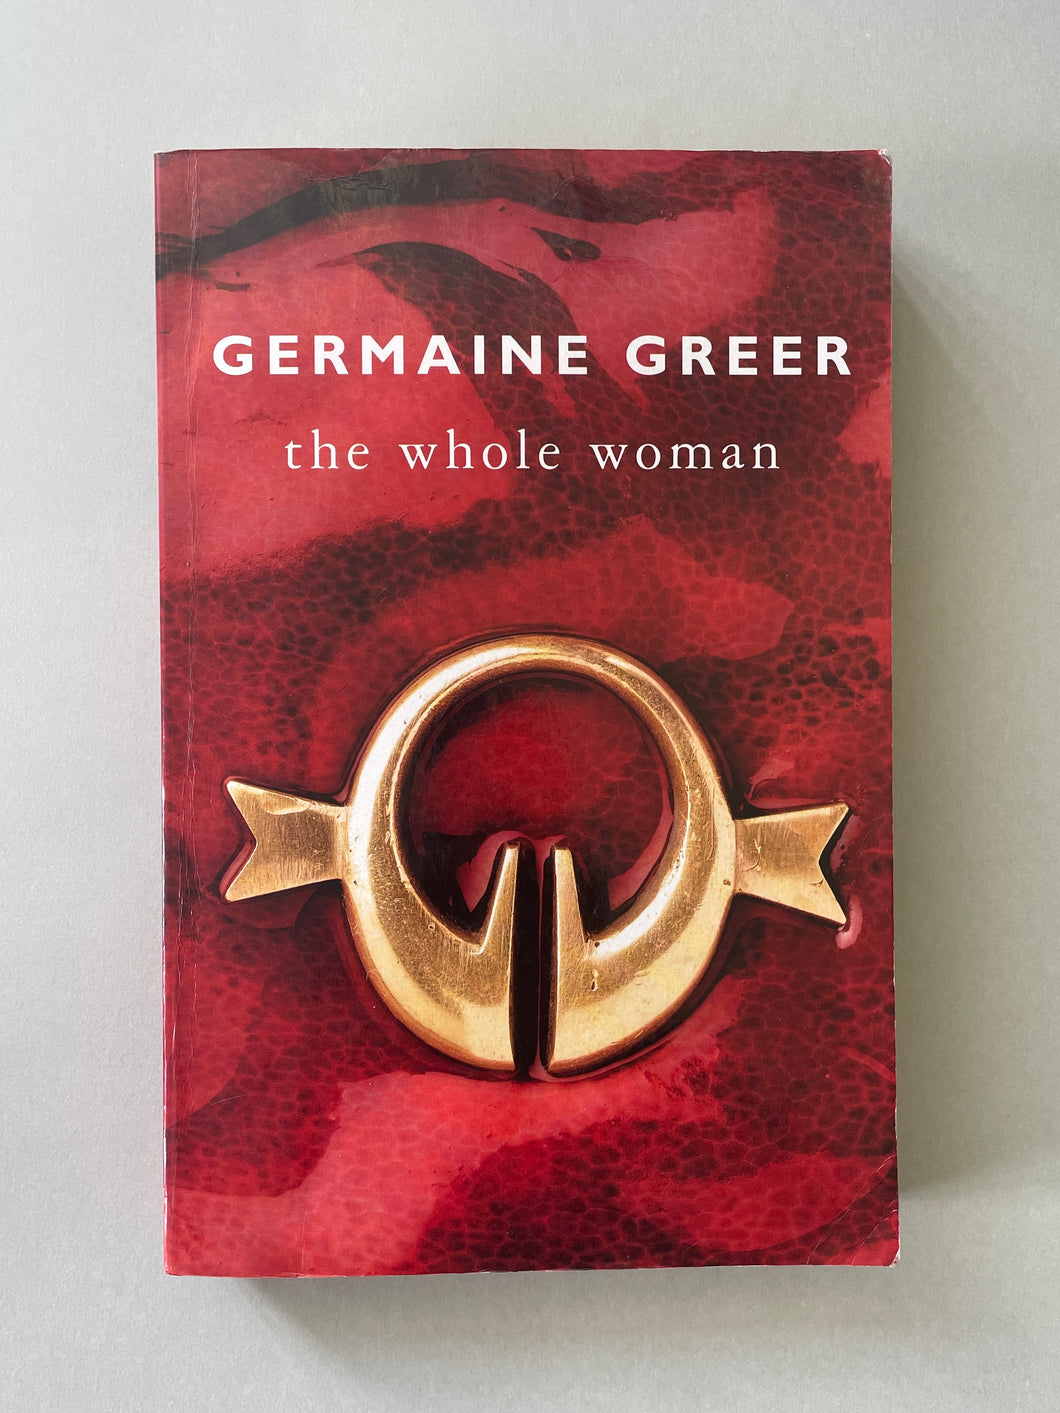 The Whole Woman by Germaine Greer: photo of the front cover which shows scuff marks, creasing and scratches.